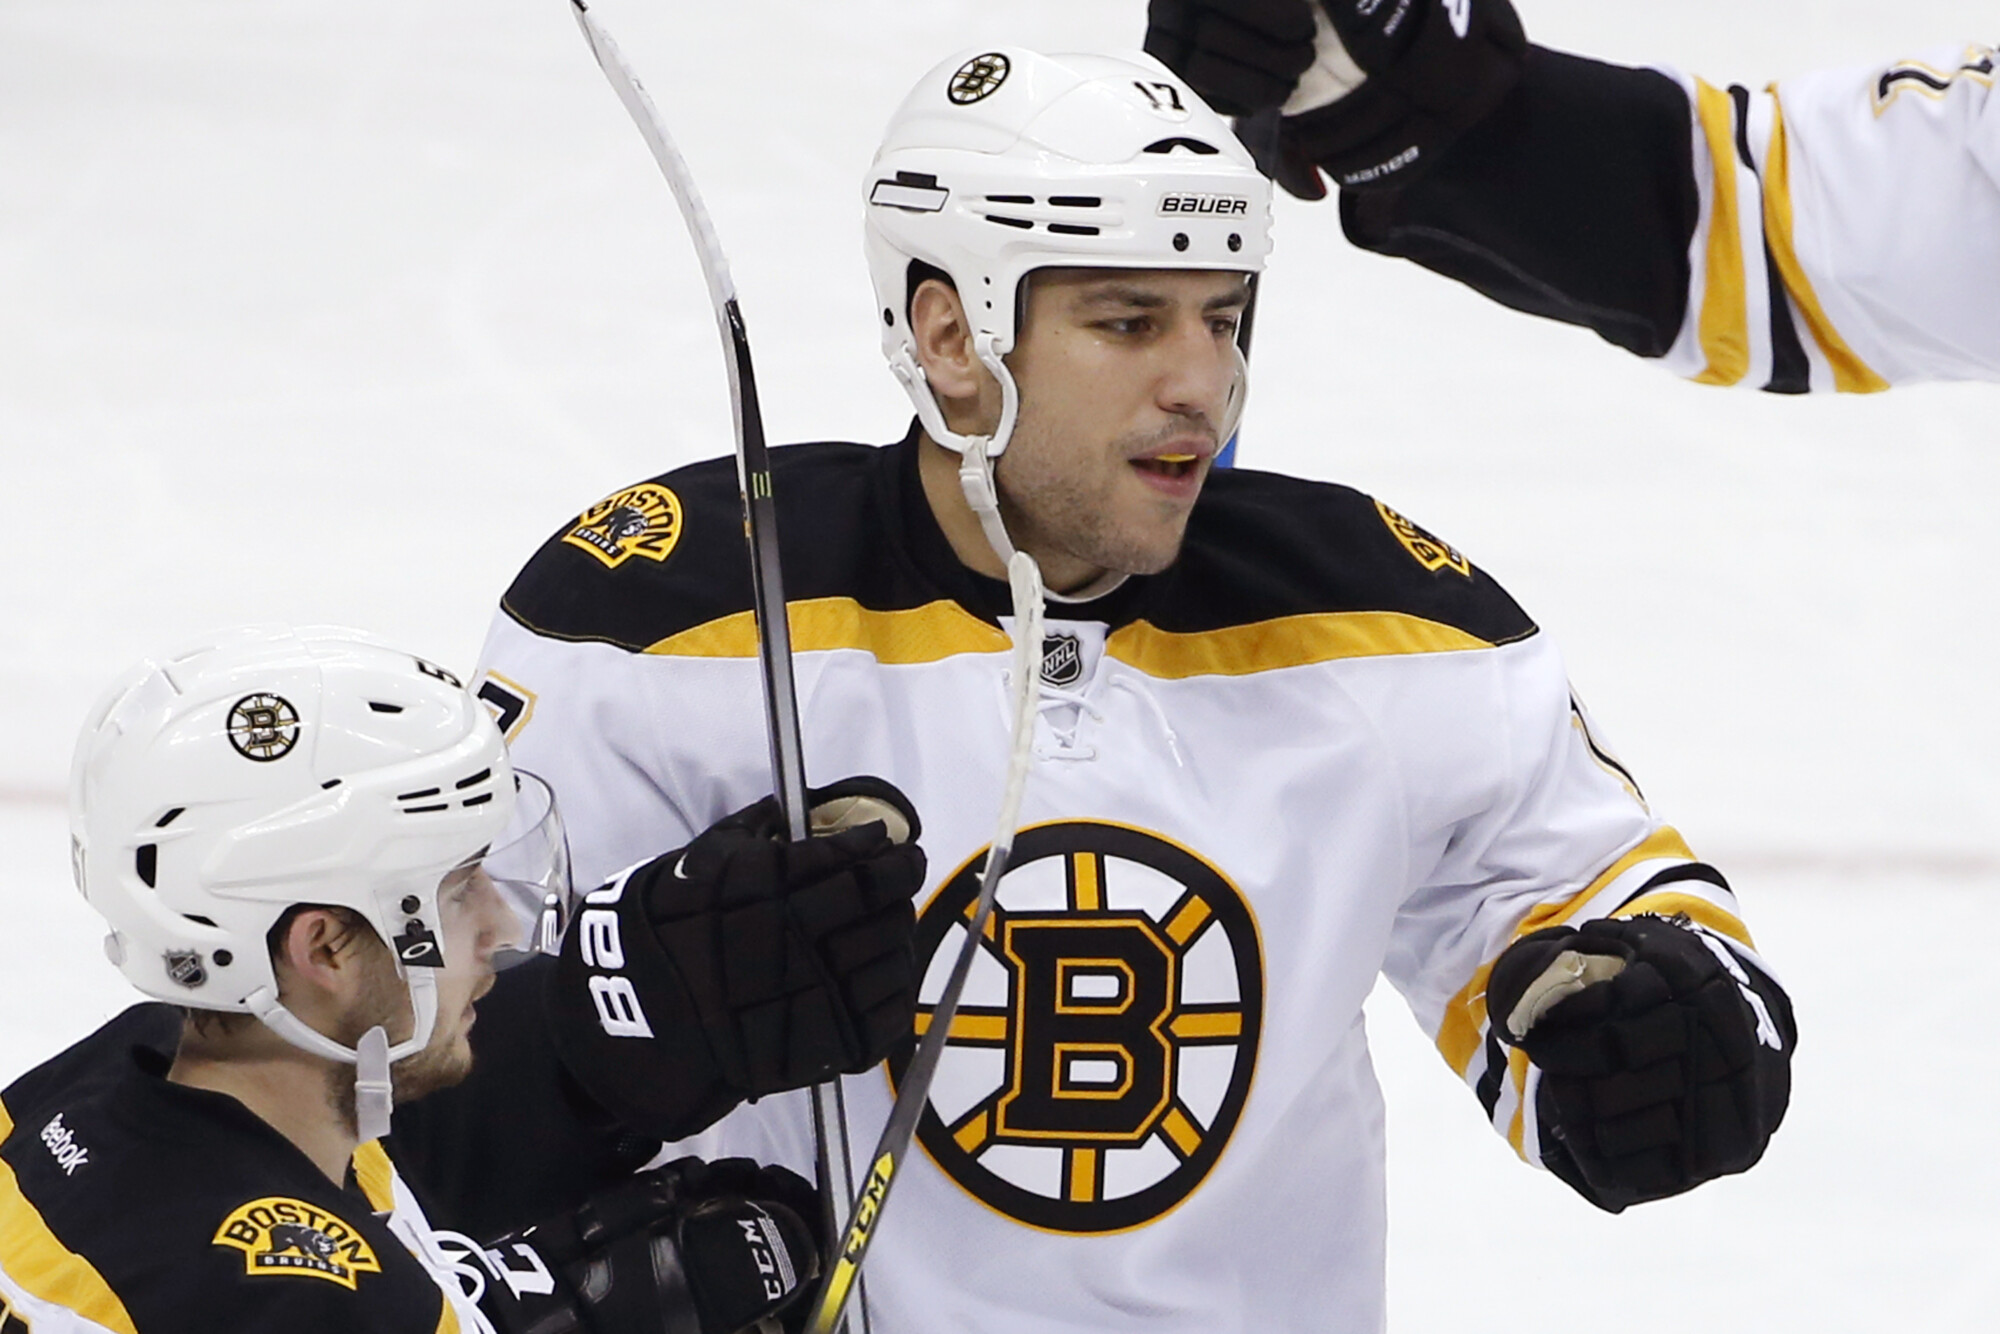 Milan Lucic re-joining Boston Bruins on one-year deal